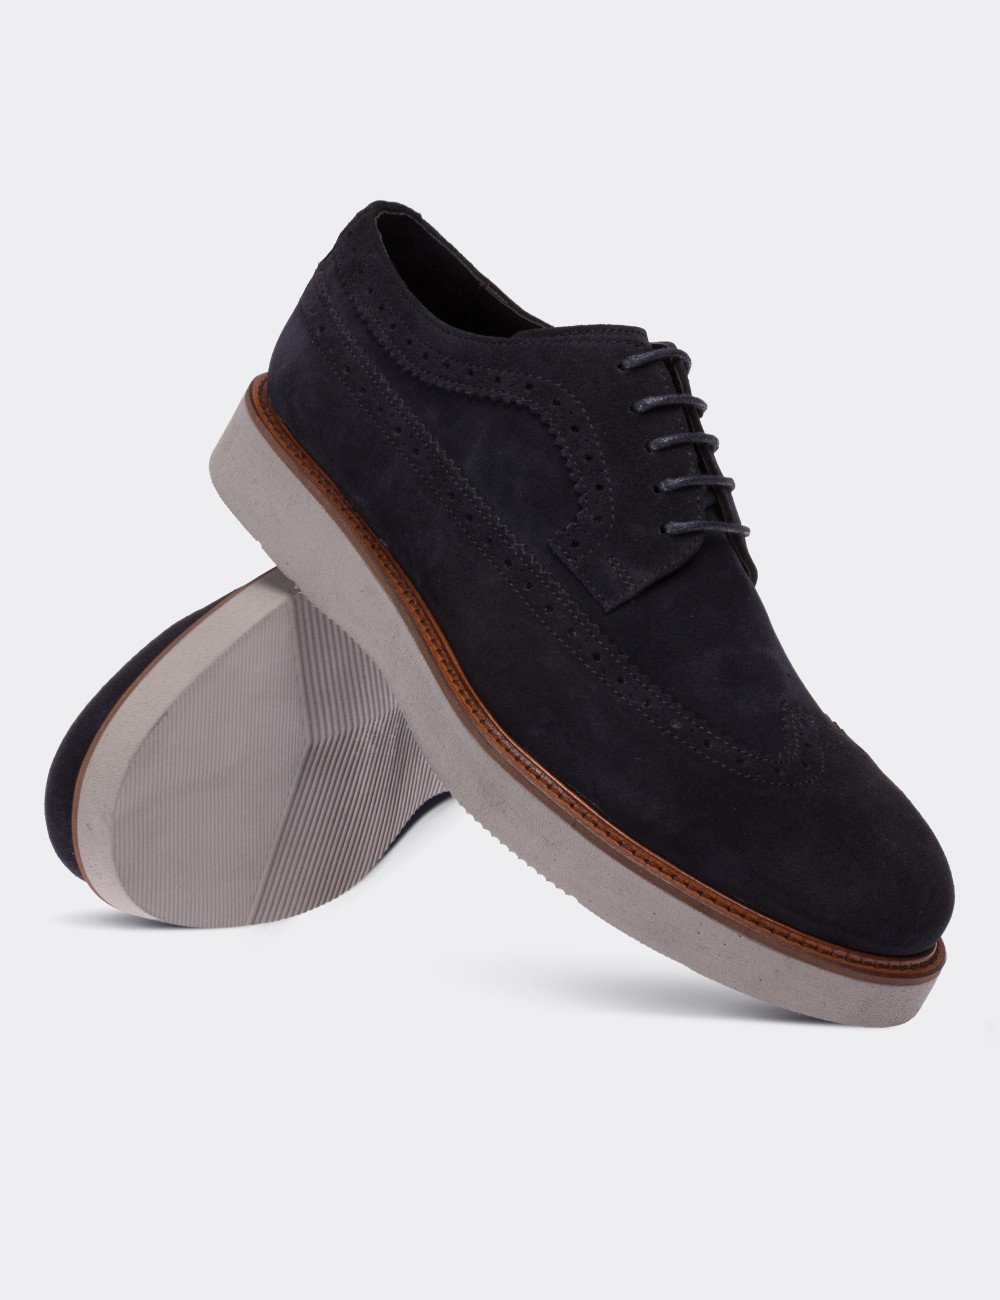 Navy Suede Leather Lace-up Shoes - 01293MLCVE28